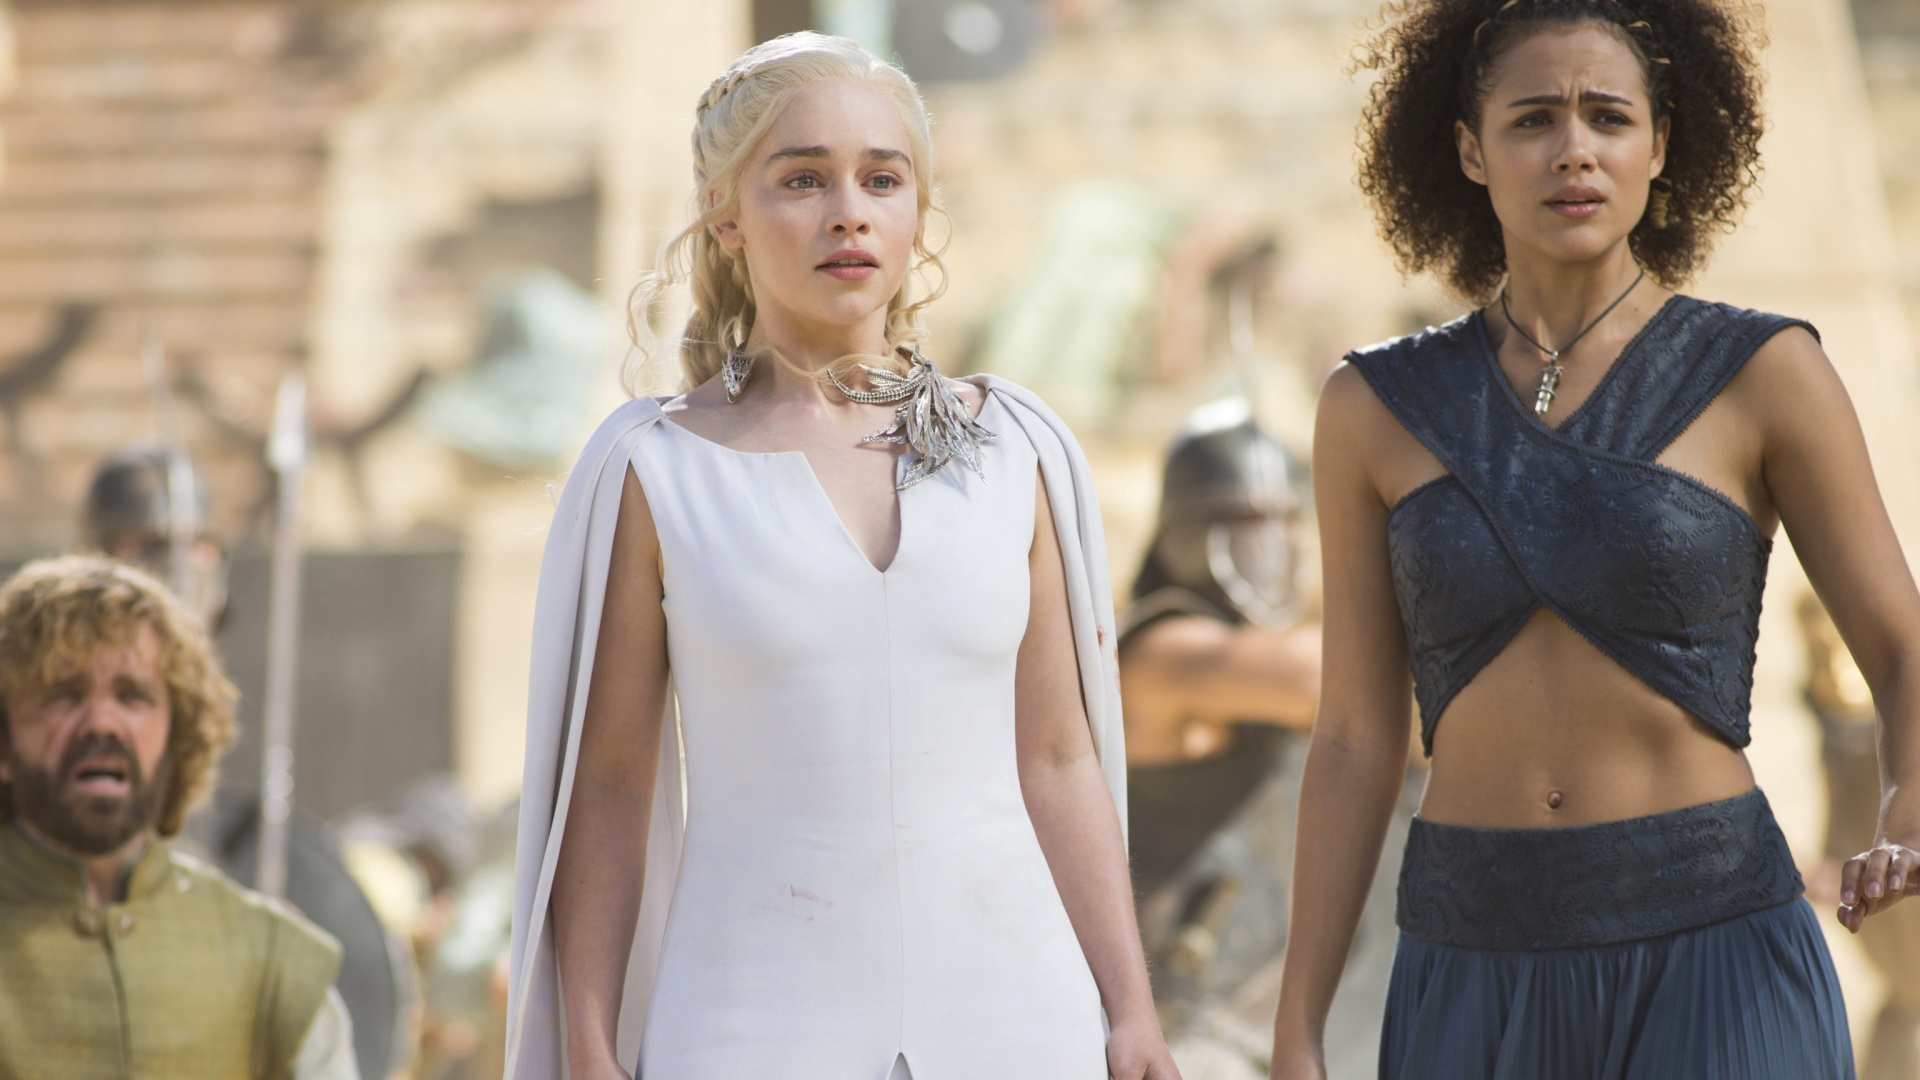 Game Of Thrones Emilia Clarke and Nathalie Emmanuel as Missandei wallpaper 1920x1080